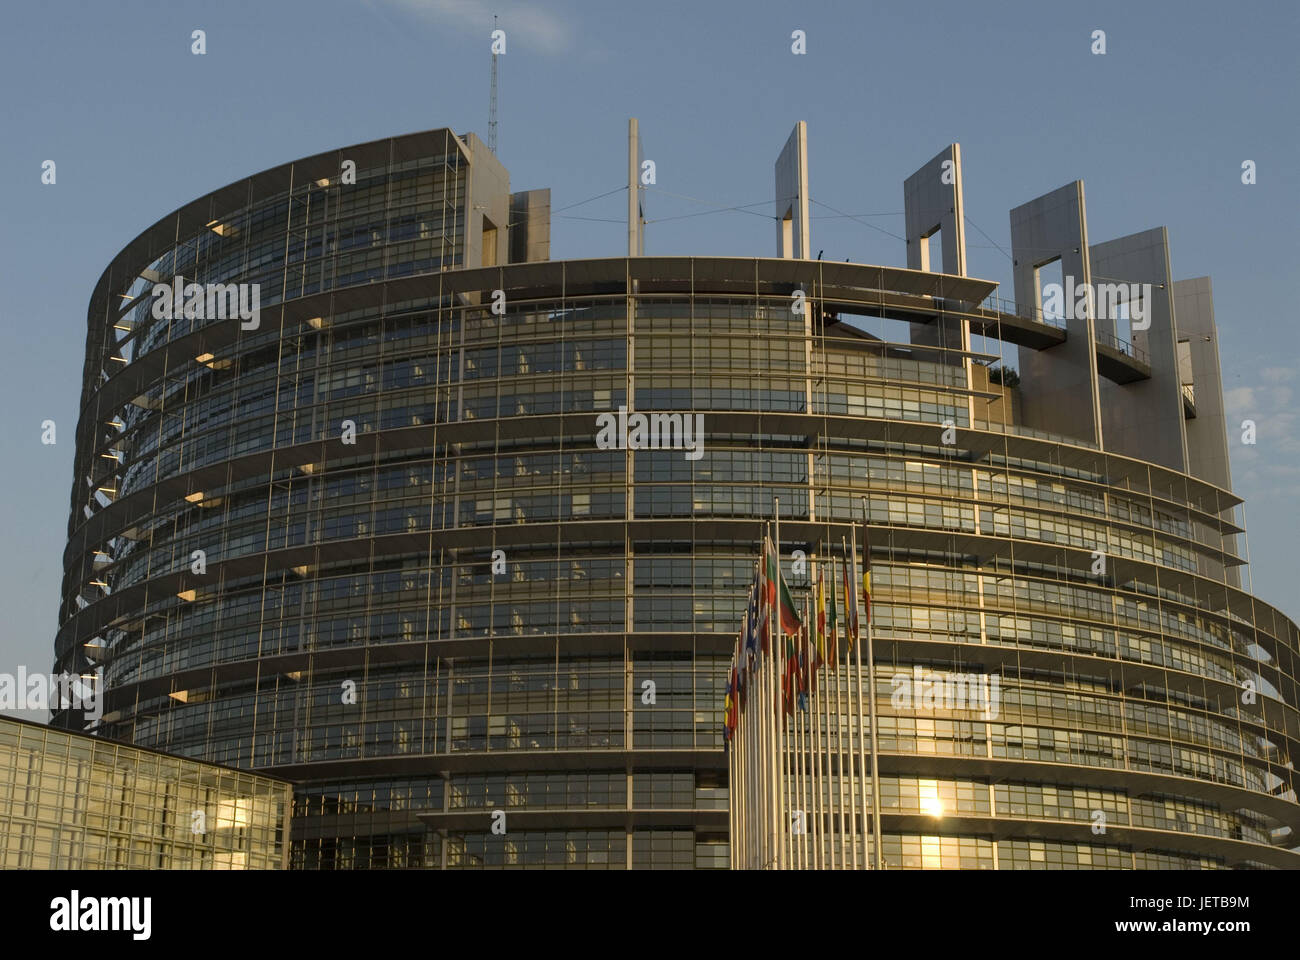 France, Alsace, Strasbourg, European Parliament, chamber of deputies, detail, flags, evening light, Europe, architecture, building, structure, glass front, flags, passed away, blow, European, flagpoles, glass front, construction, mirroring, sunlight, outside, deserted, Stock Photo